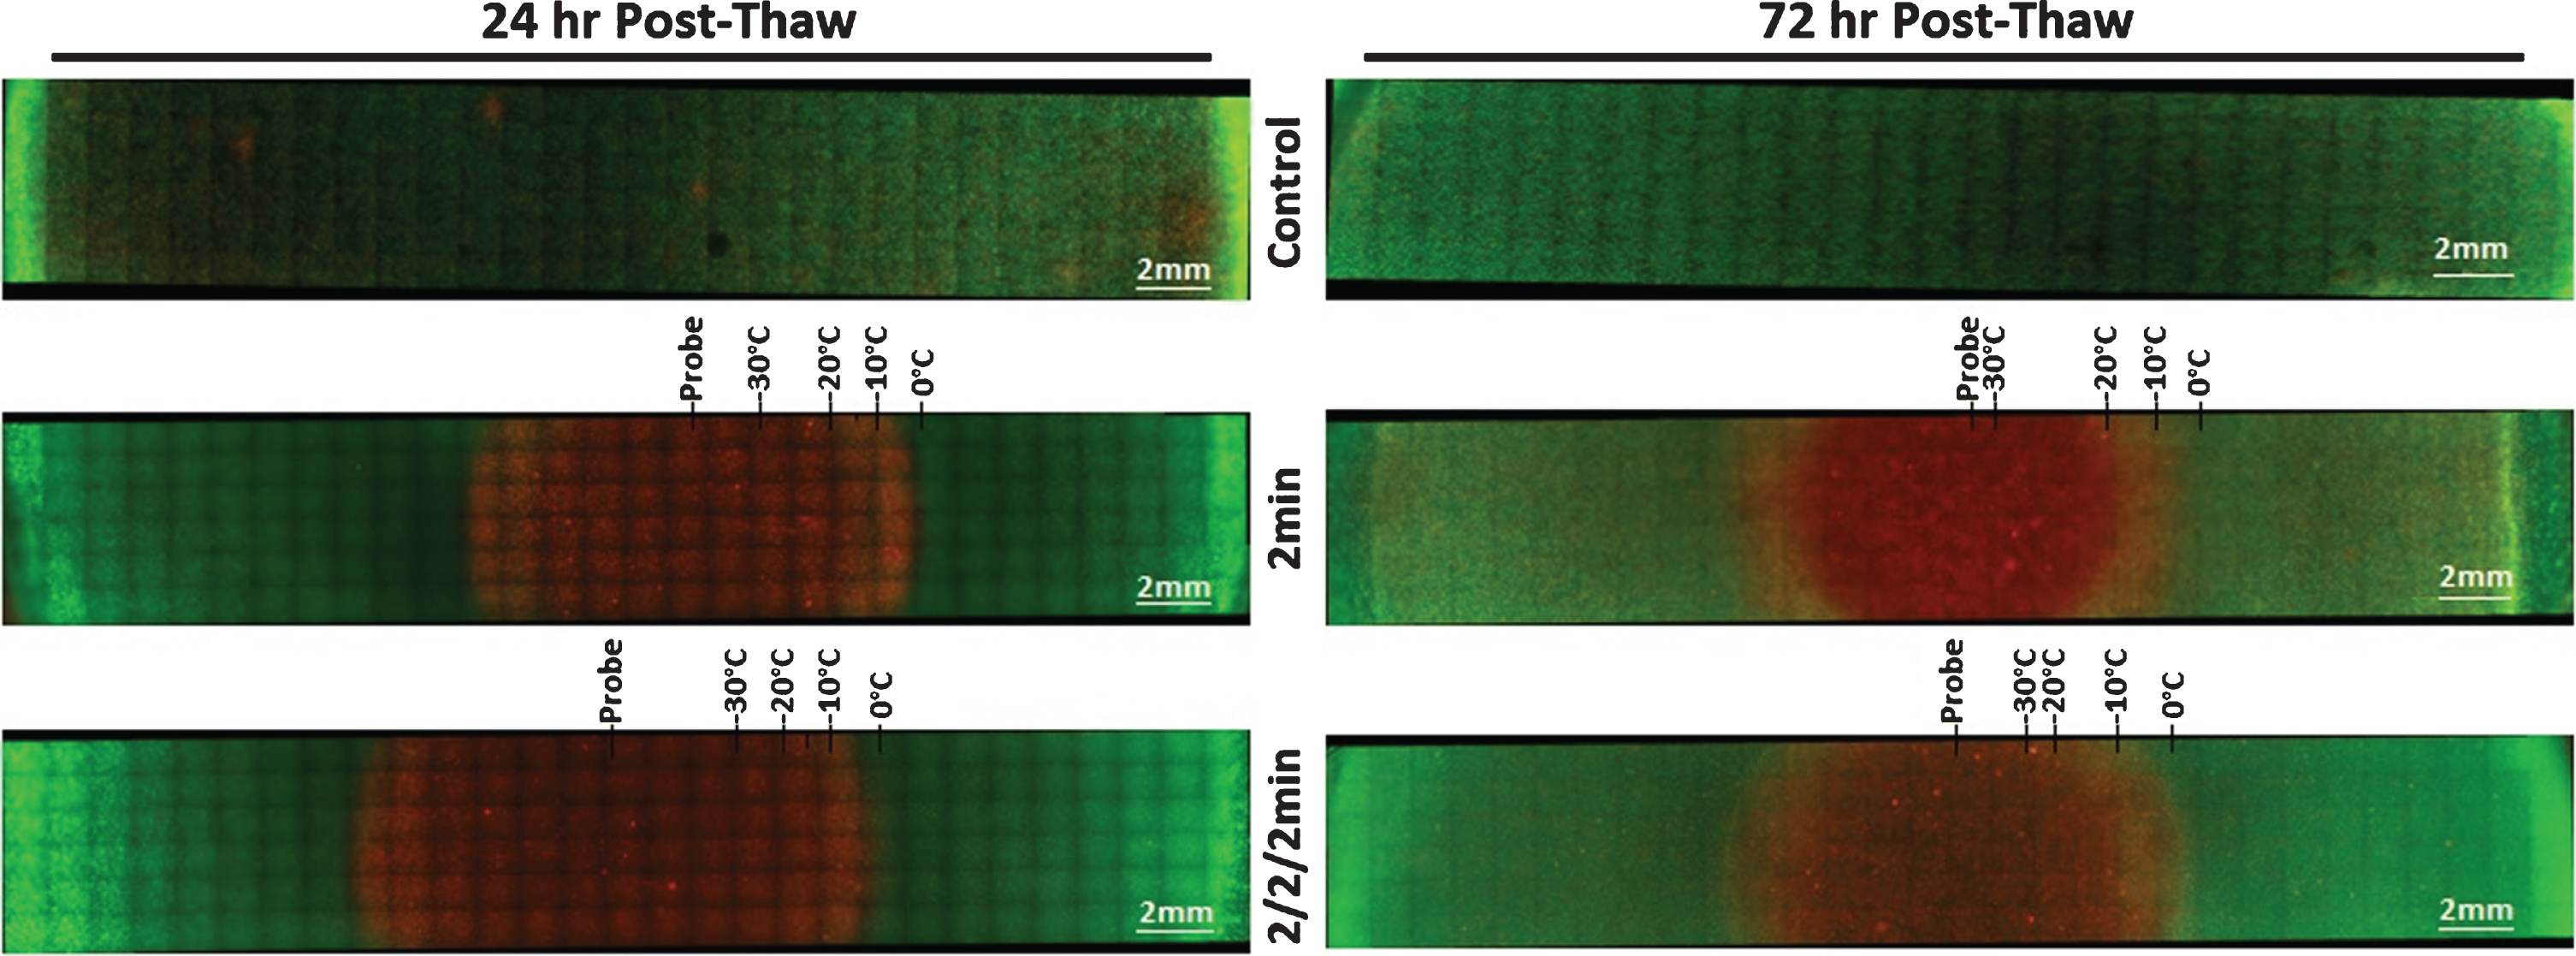 Fluorescent Micrographs of the SCaBER-TEMs Following Single and Double 2 min Freezes. At 24 hr (A) and 72 hr (B) post-thaw, unfrozen controls, single freeze, and double freeze TEMs were probed with Calcein-AM (green, live) and Propidium Iodide (red, dead) and visualized using fluorescent microscopy to determine the extent of cell death. Images were stitched together from a 6×30 set of overlapping images using a 10X objective. Measurements were made using the Zeiss ZEN software and temperatures from the corresponding IR images were mapped to the micrographs.